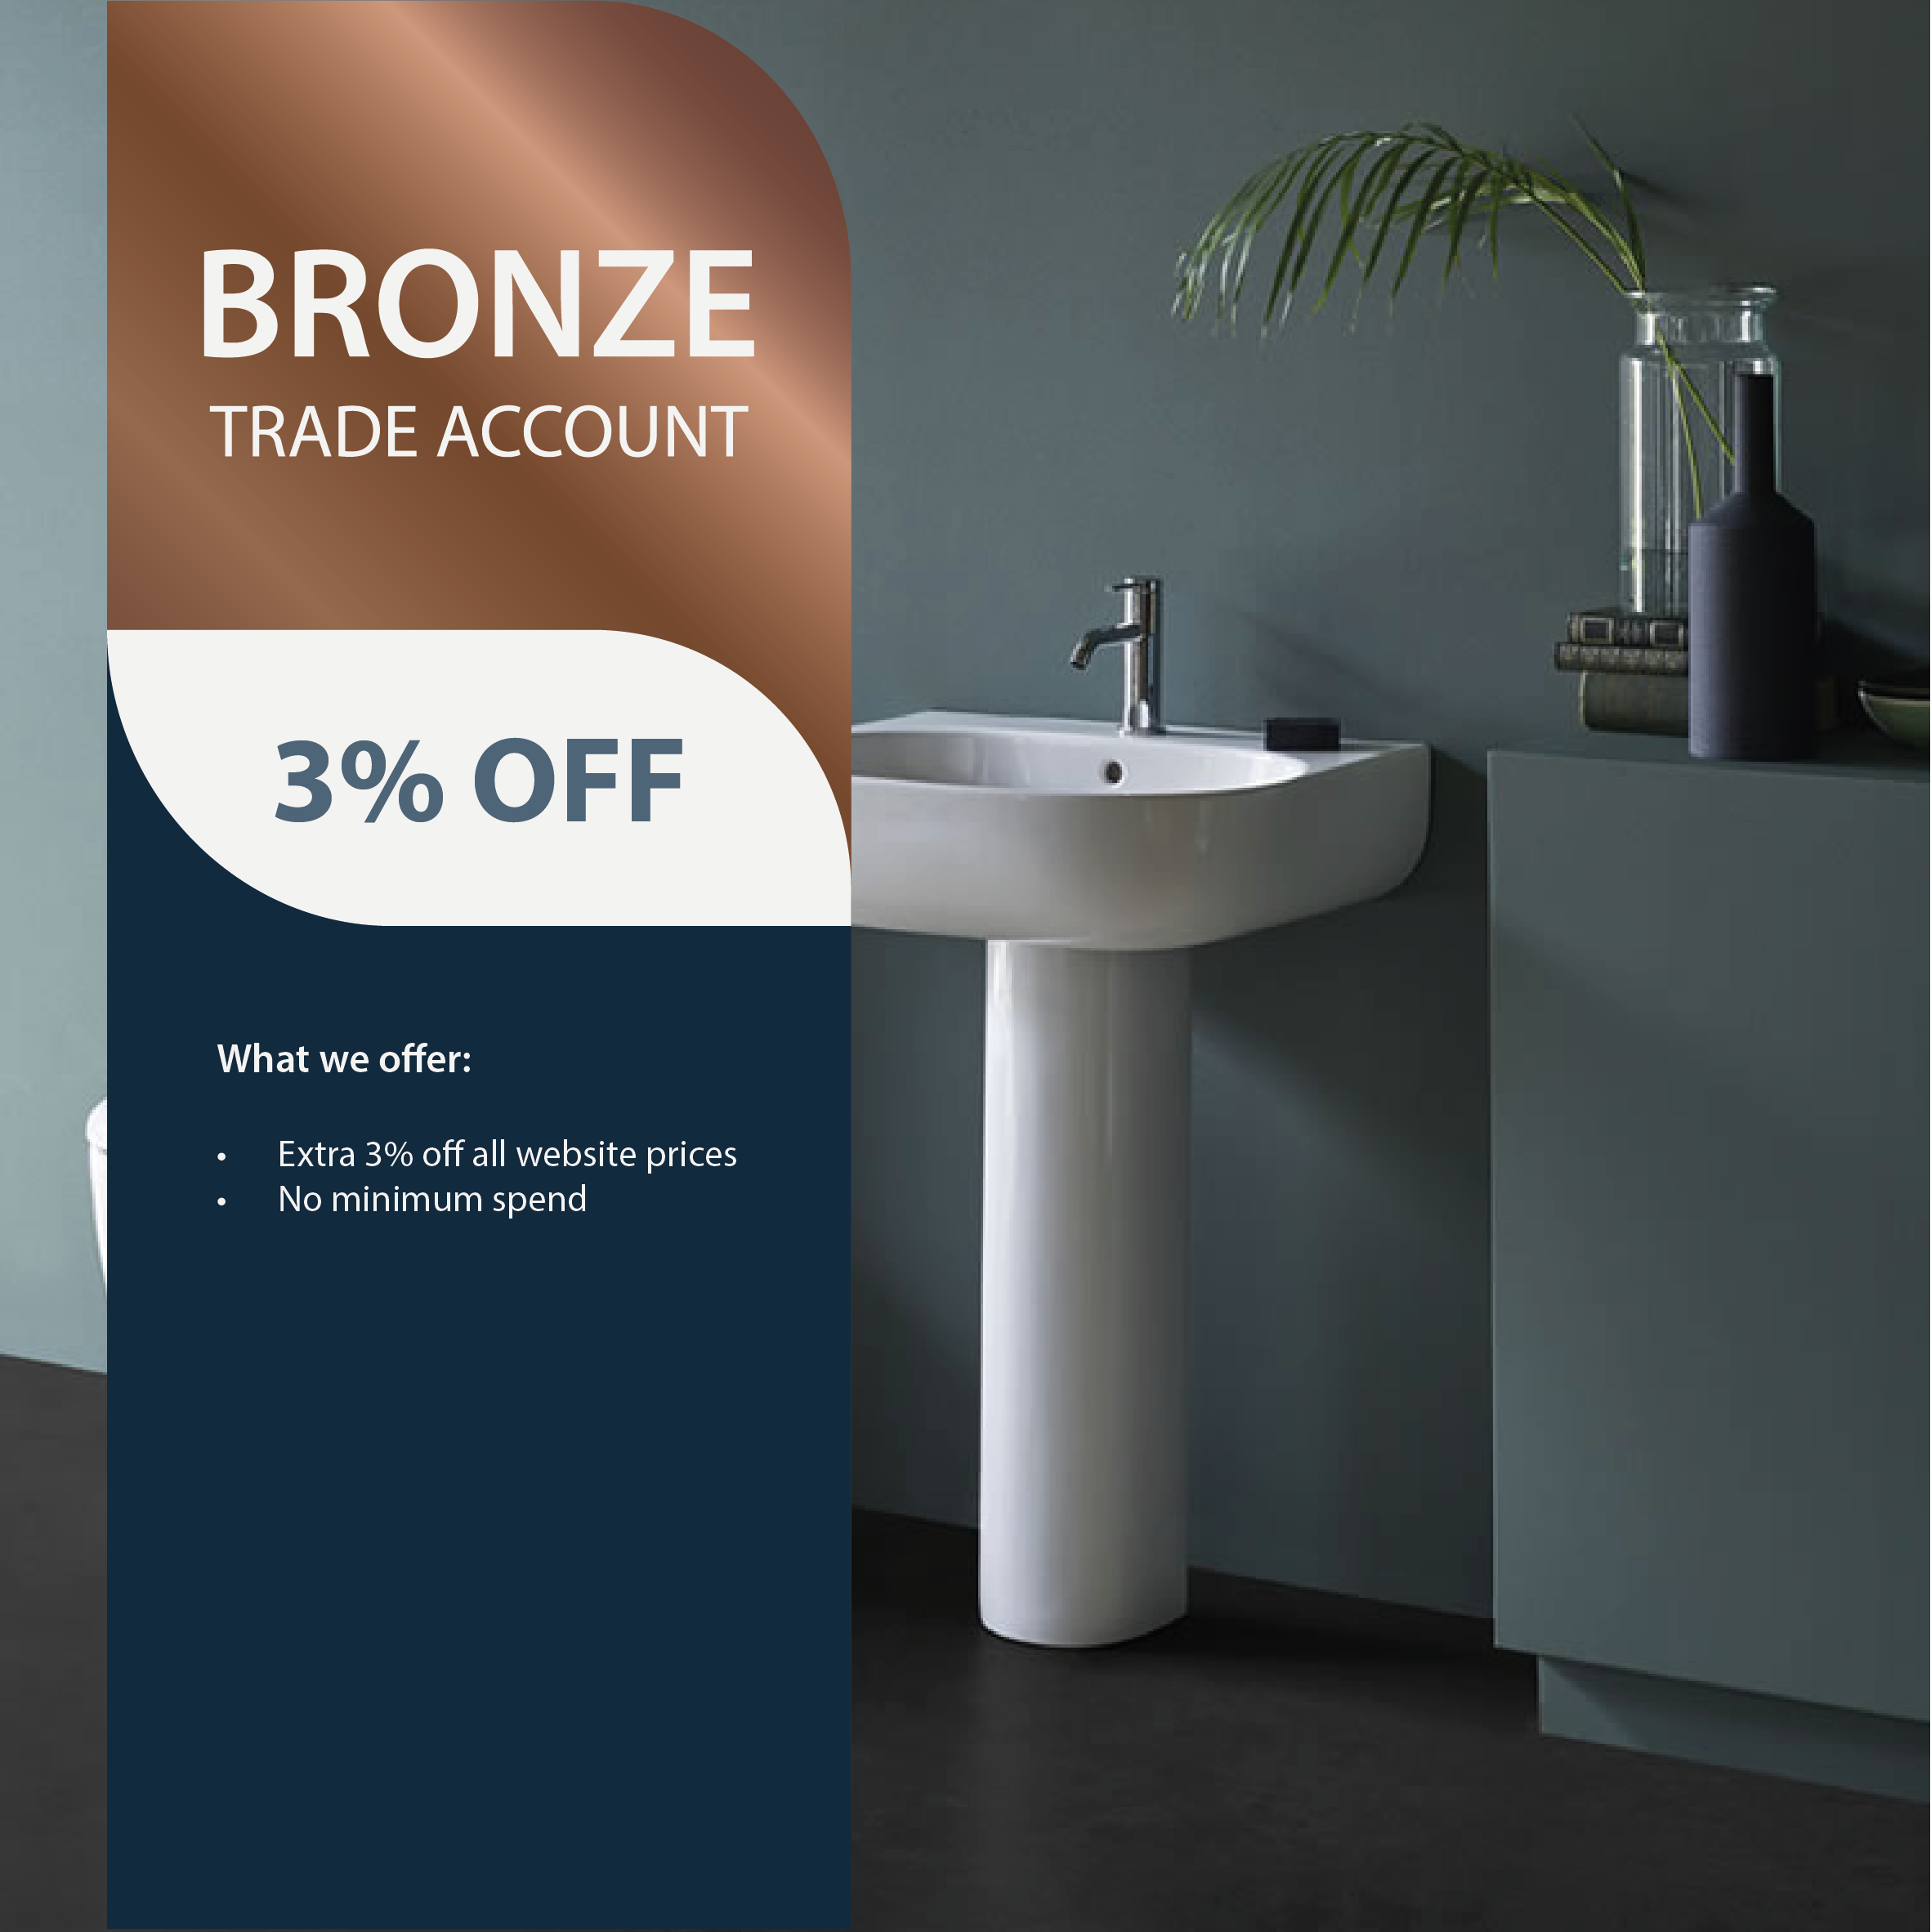 Image of Sanctuary Bathrooms Trade Account Bronze Package Benefits